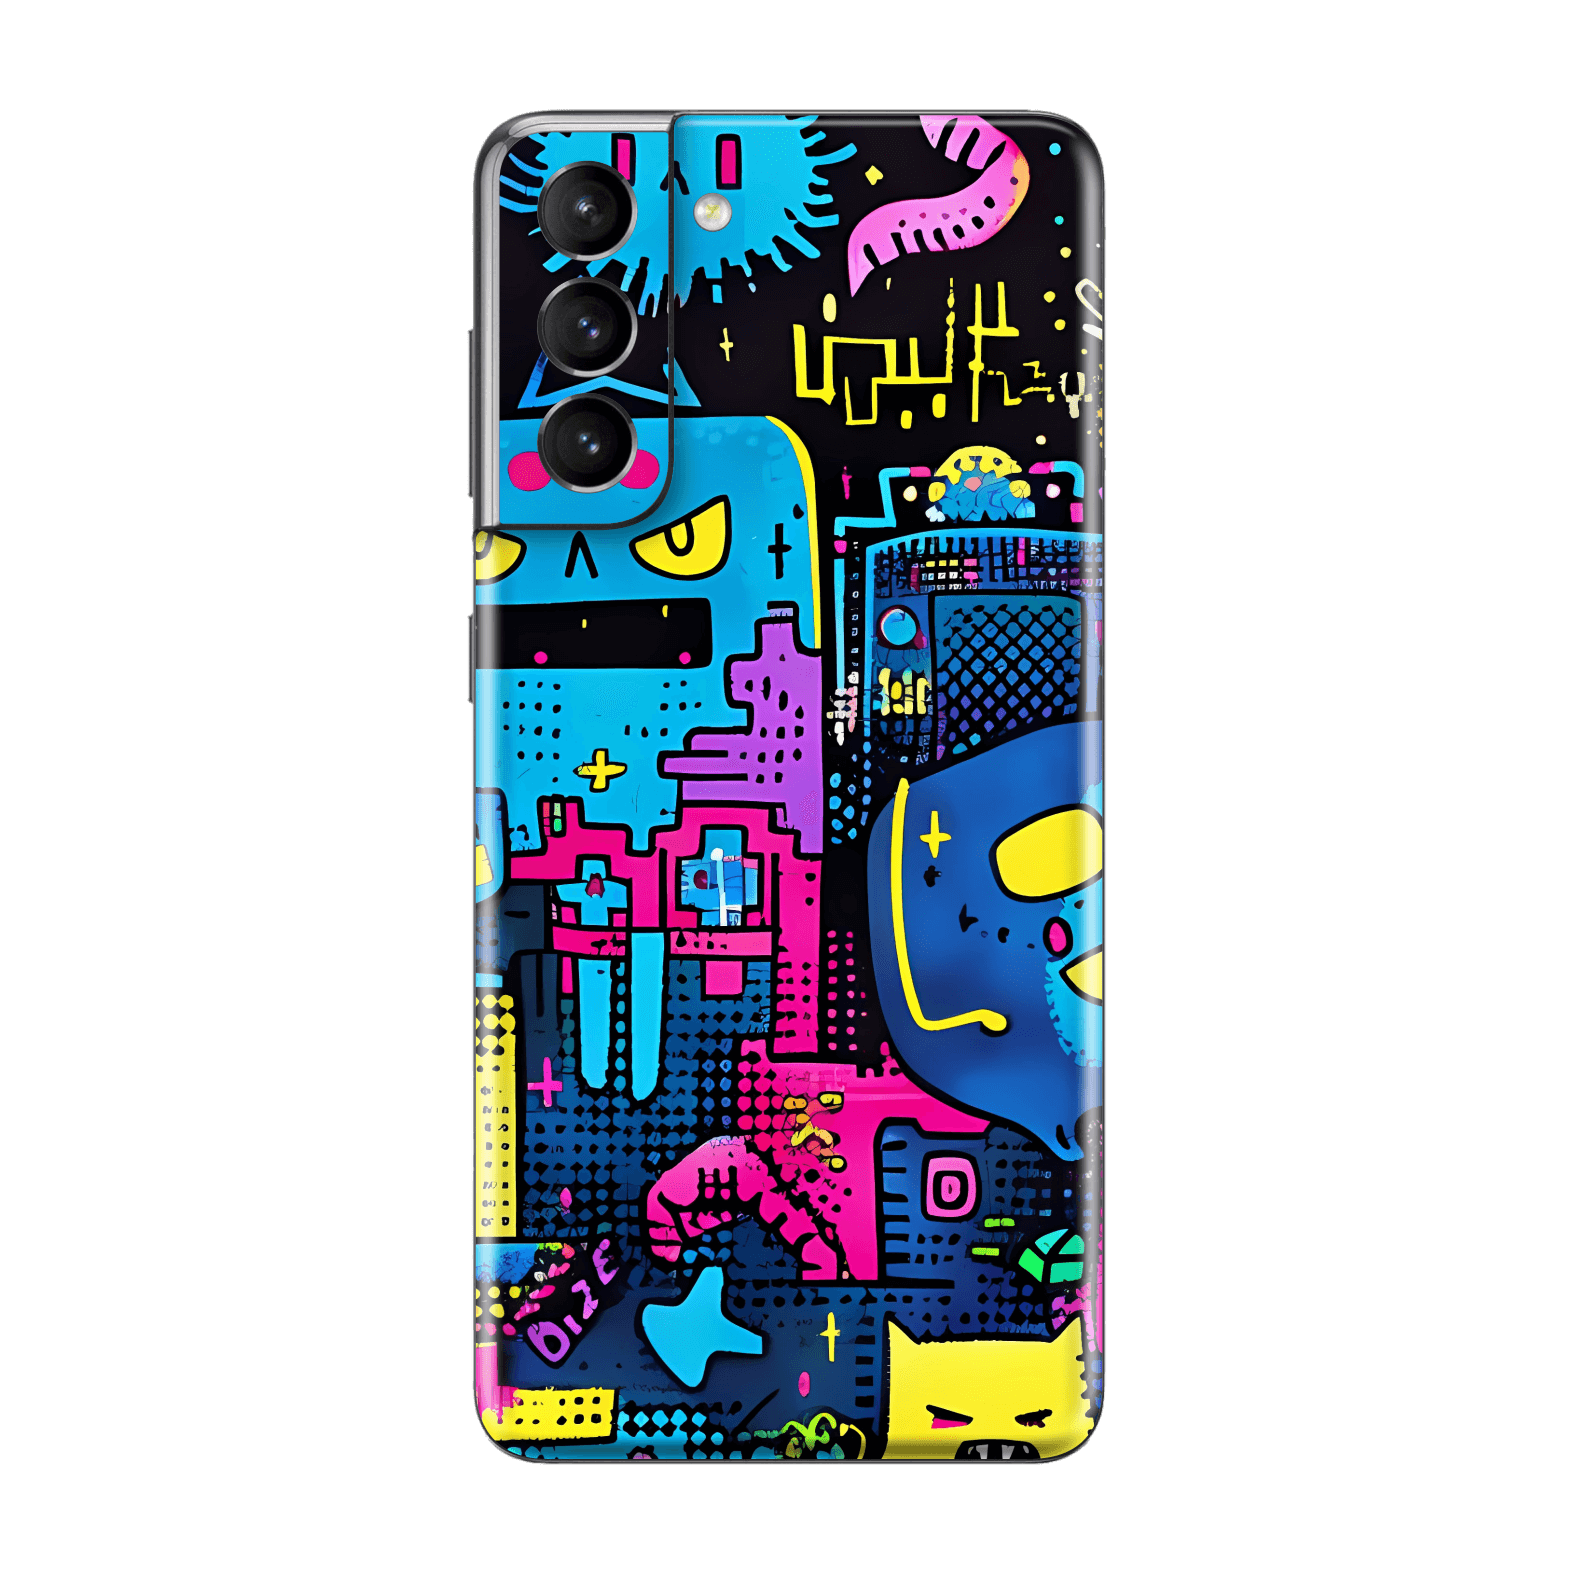 Samsung Galaxy S21 Print Printed Custom SIGNATURE Arcade Rave Gaming Gamer Pixel Skin Wrap Sticker Decal Cover Protector by QSKINZ | QSKINZ.COM